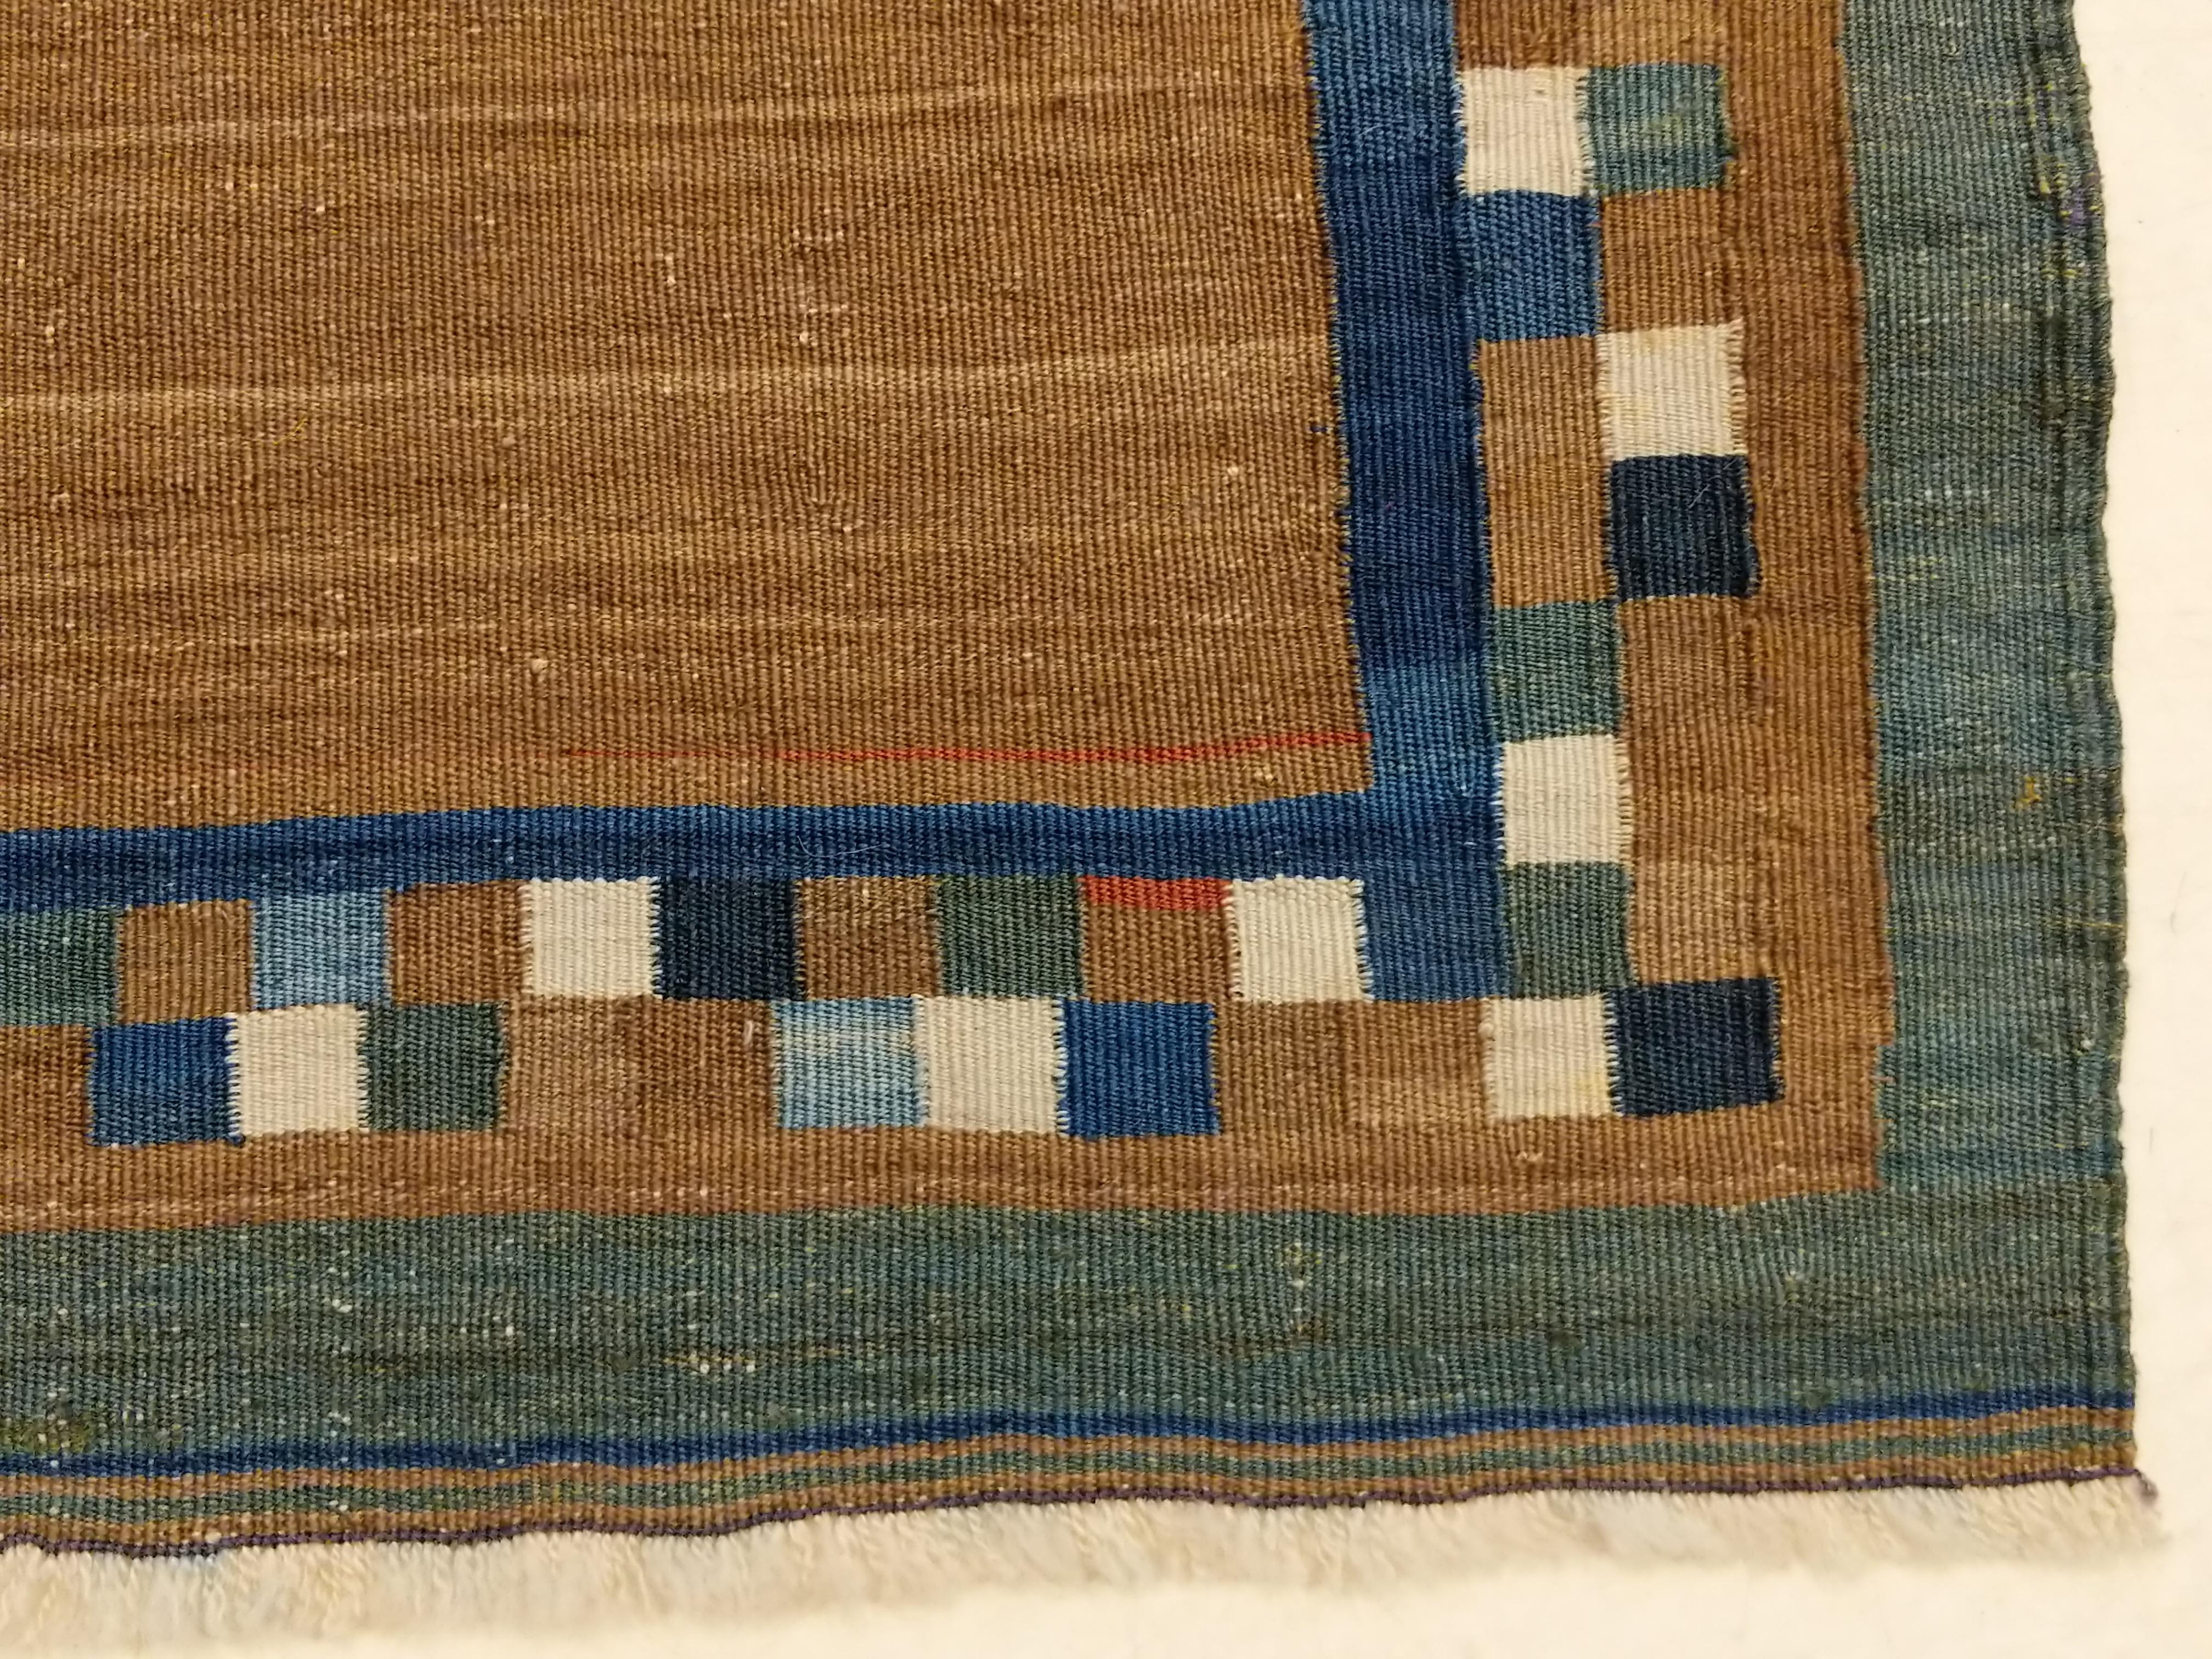 A diminutive masterpiece of flat-woven tribal art, distinguished by a dazzling chequerboard border framing an open field composed of natural camel wool. The apparently random arrangement of polychrome squares is reminiscent of the most refined